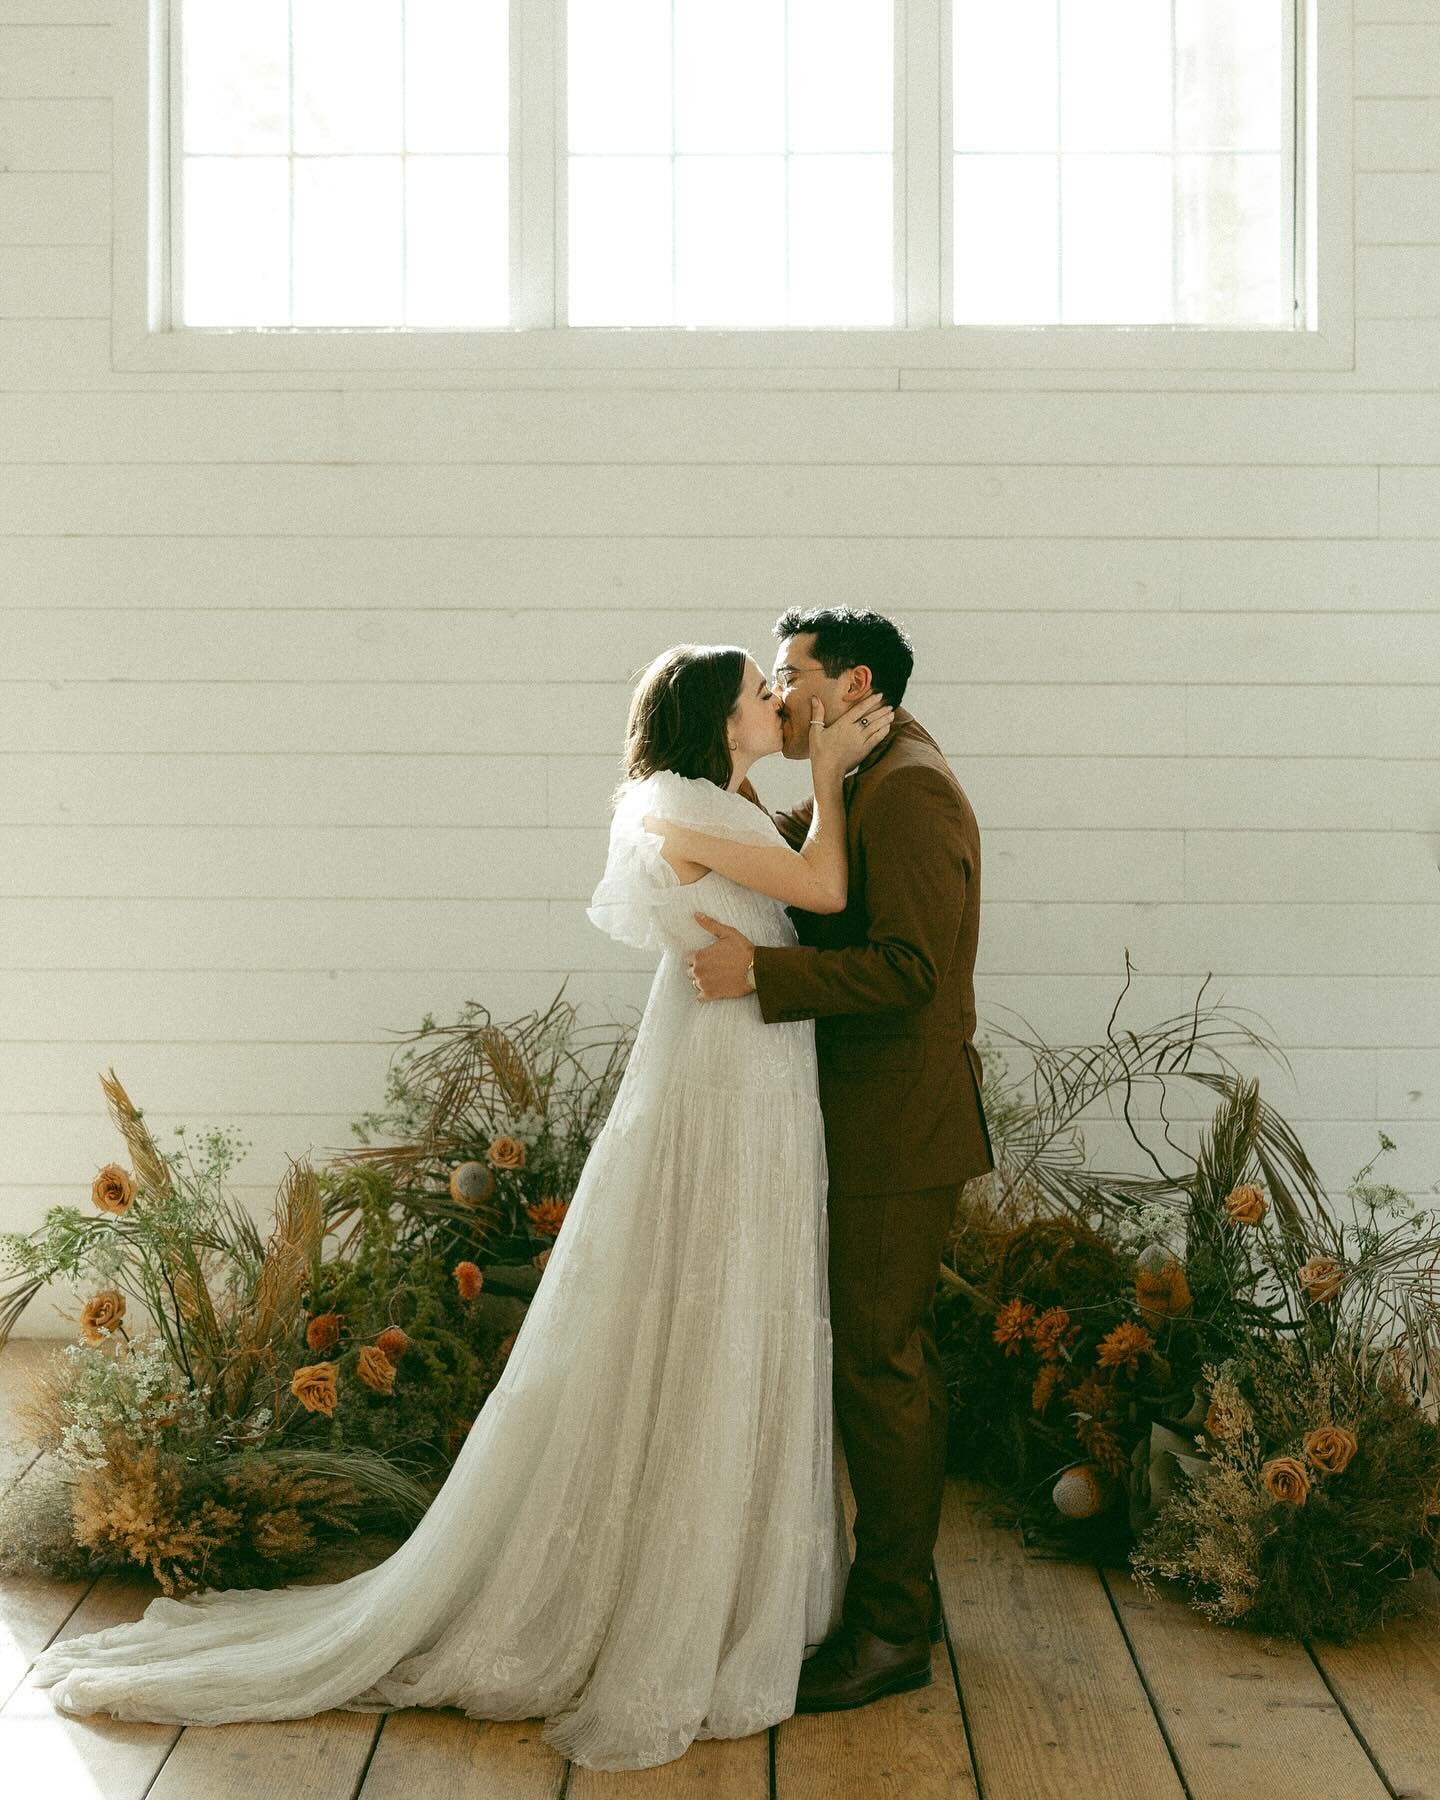 Love is finding that one special person you can&rsquo;t imagine living without.

Just like Haley and Devon, who came to me with a vision for their perfect day, you deserve a wedding that tells your unique love story.

They chose my design and coordin